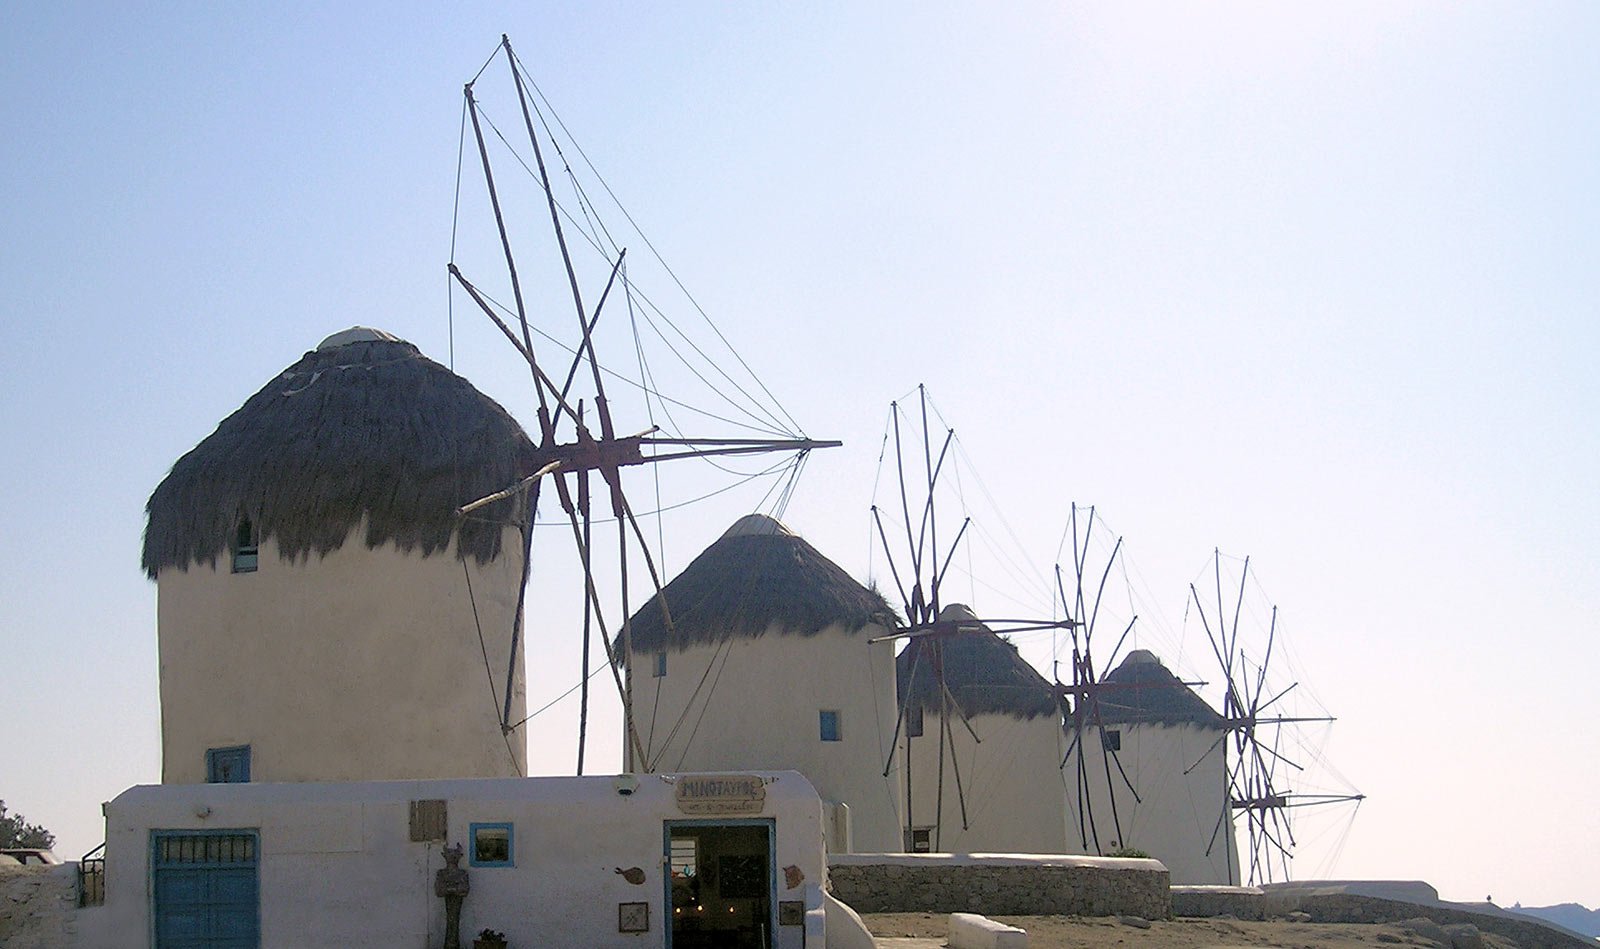 a number of windmills on a hill near a body of water